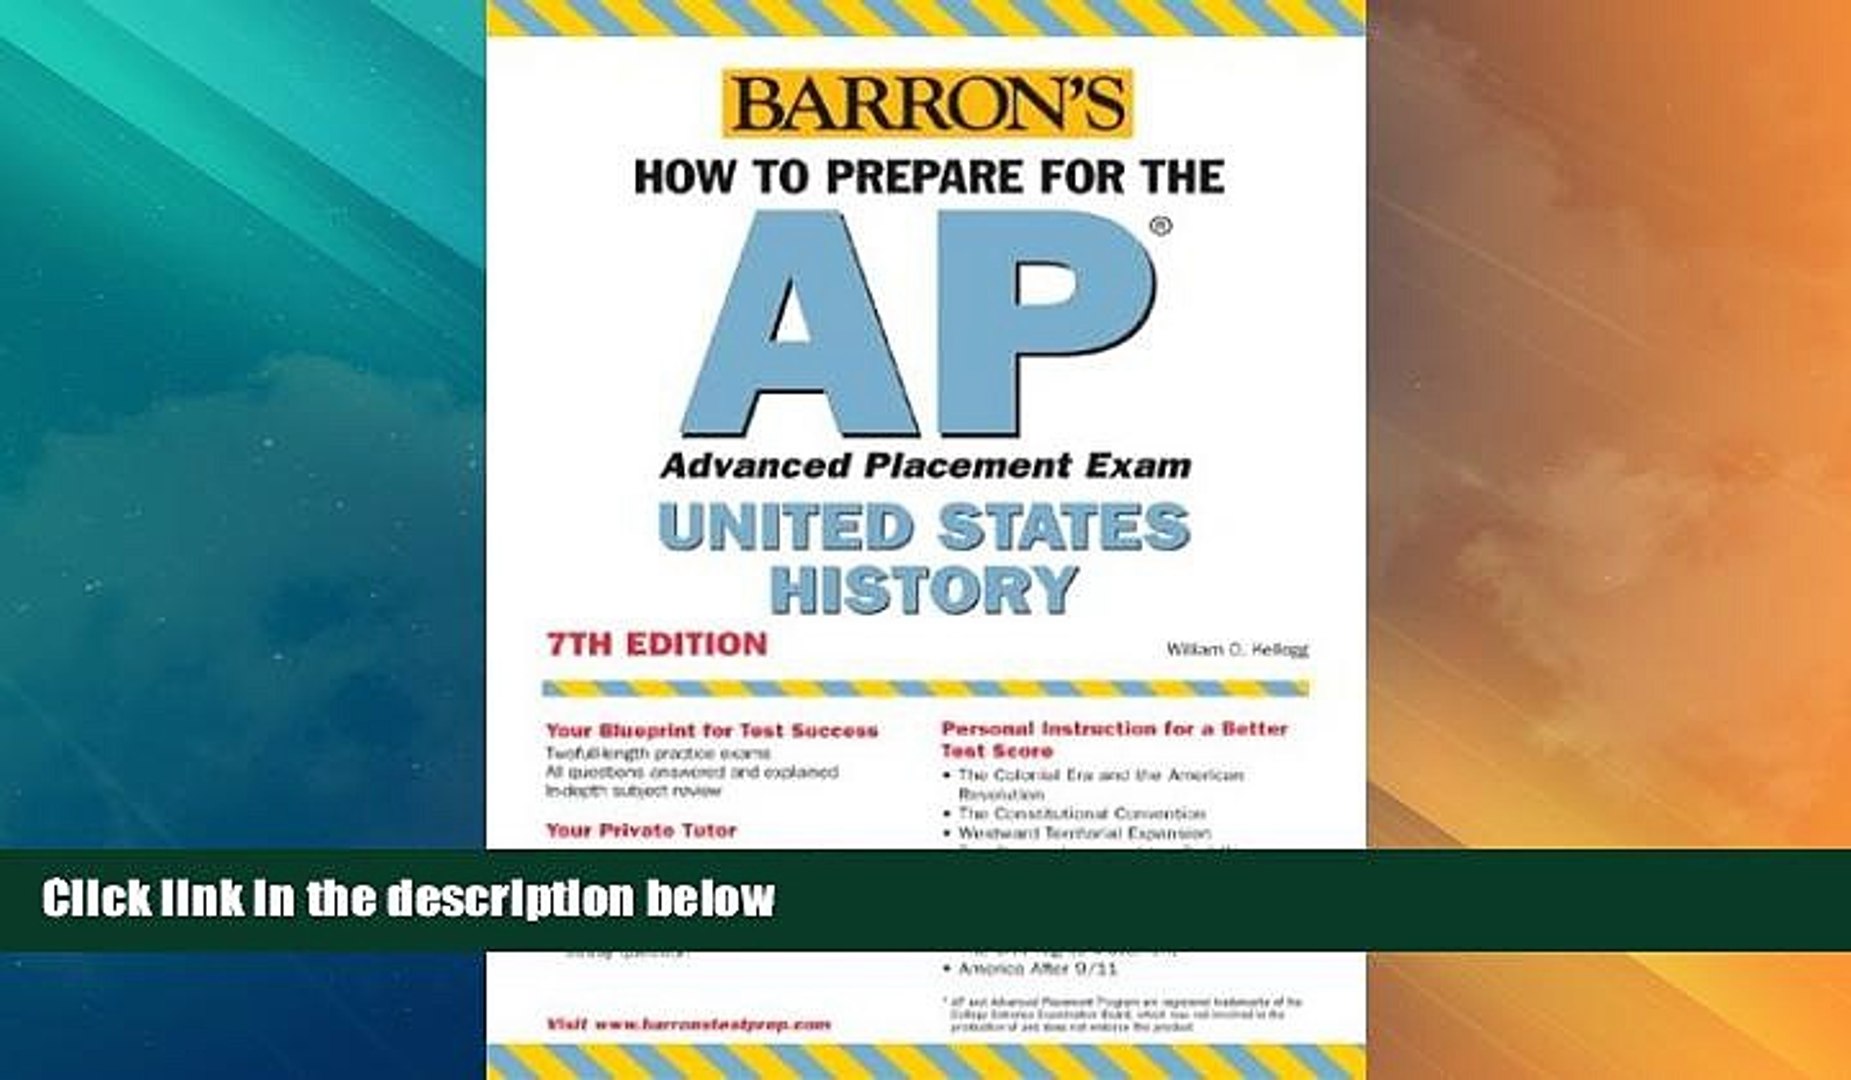 Looking to prepare for the AP United States History exam? Barron's has you covered. Here you'll find